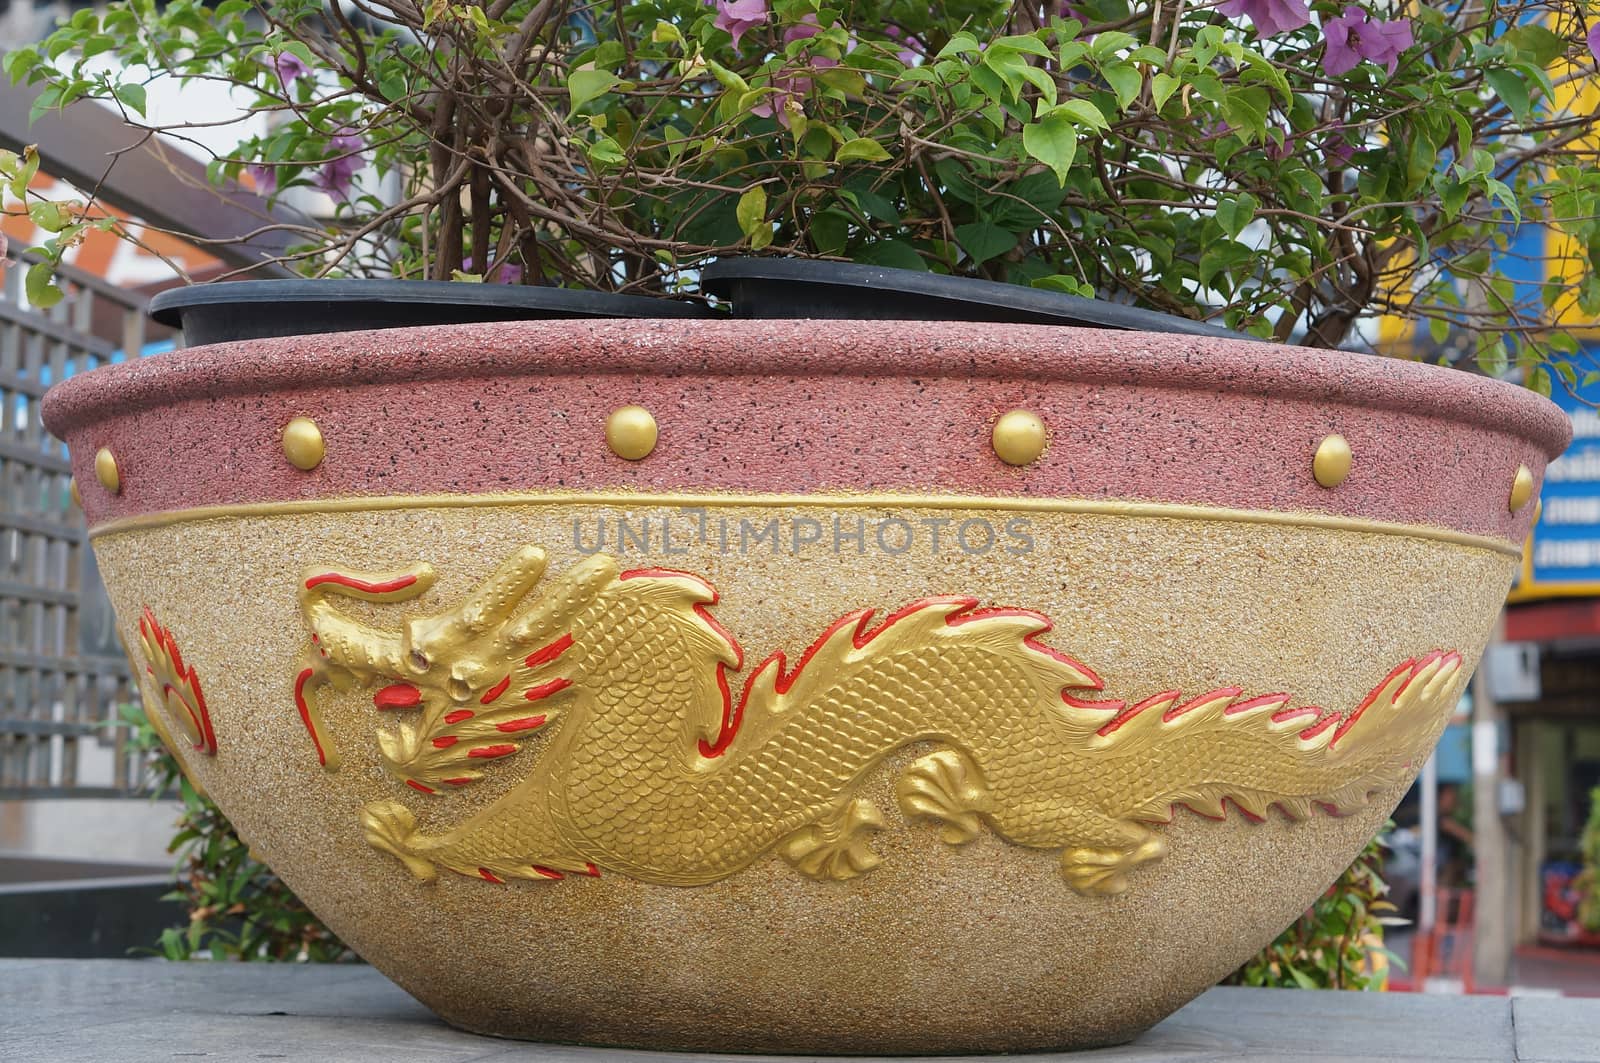 Beautiful of flowerpot dragon pattern was placed at roadside in Thailand.